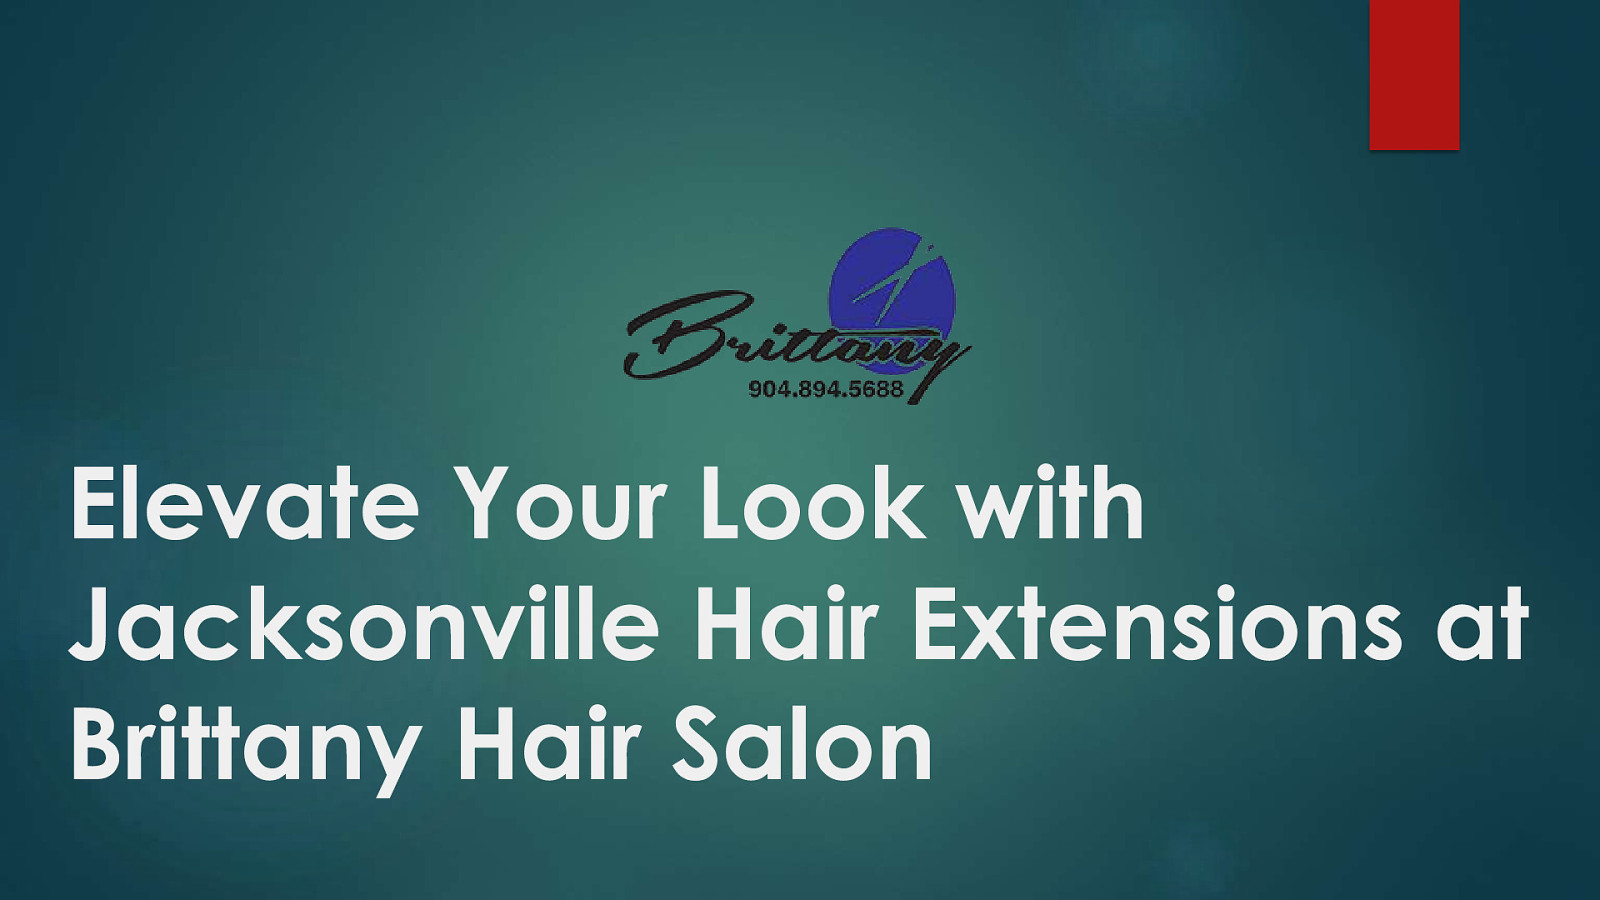 Transform Your Appearance with Jacksonville Hair Extensions at Brittany Hair Salon